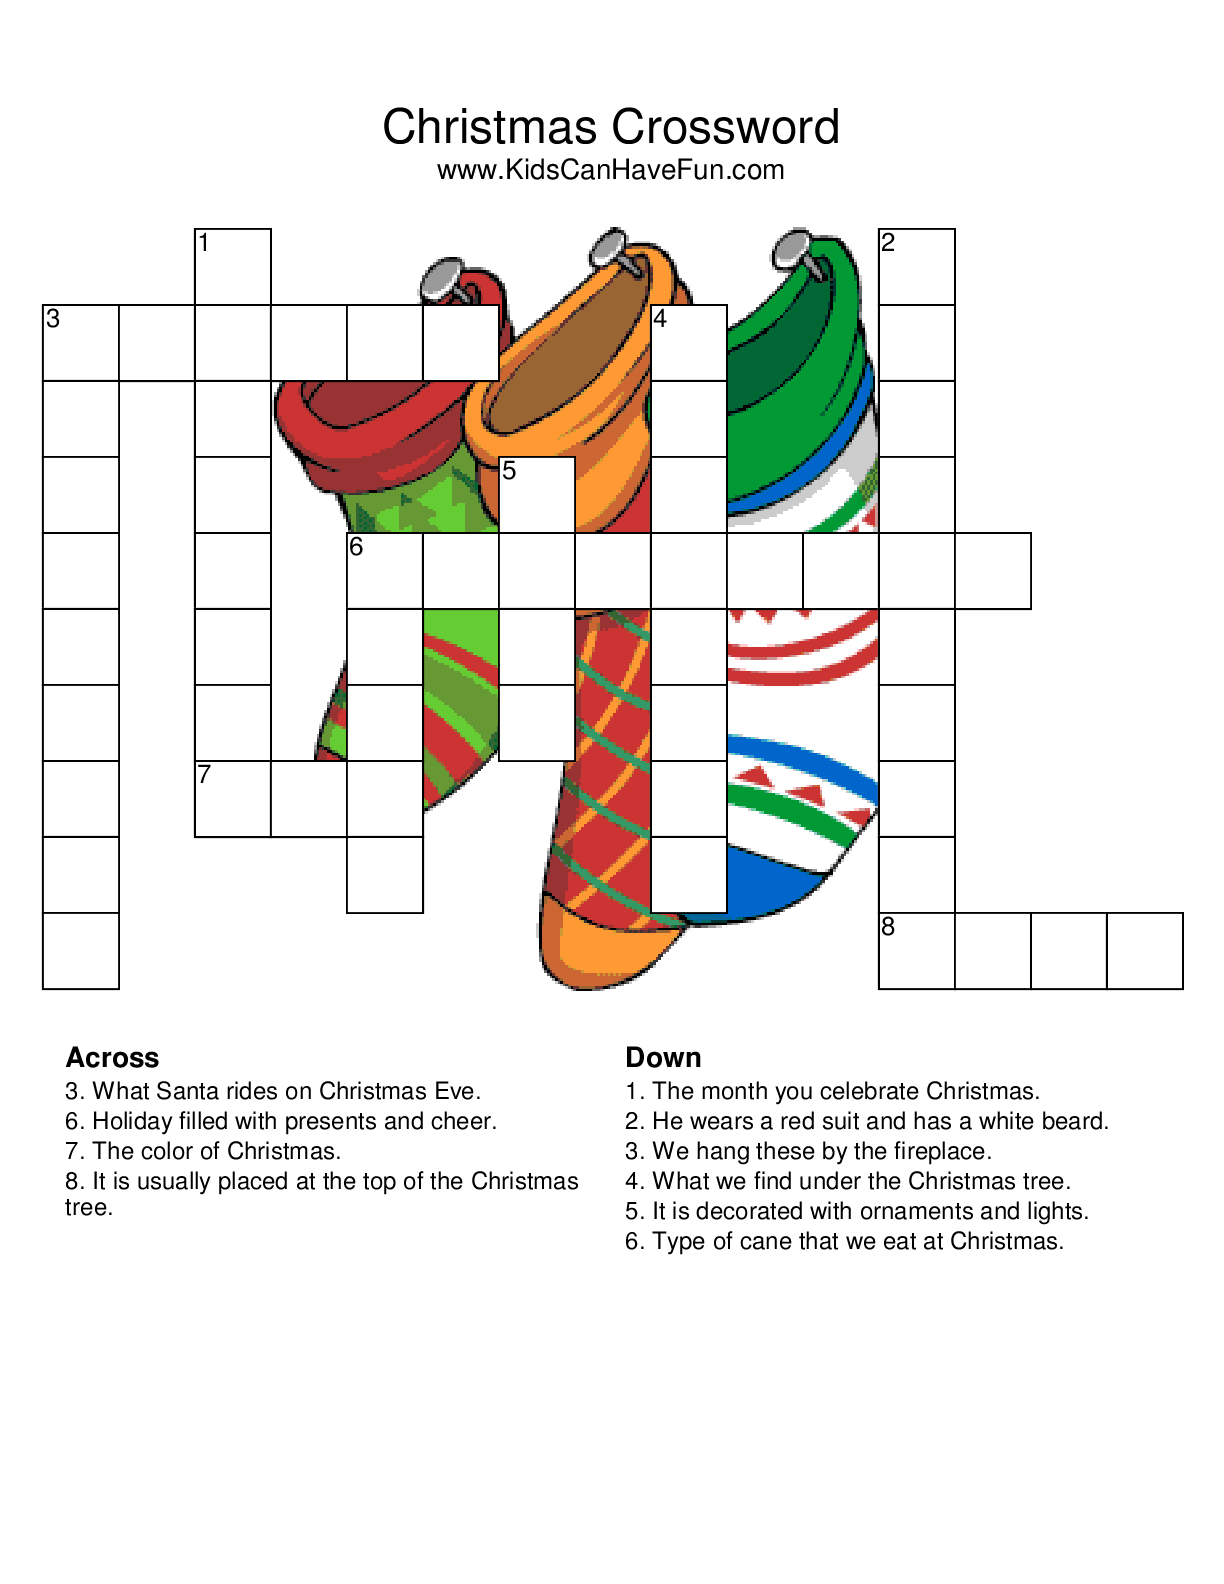 Christmas Crossword Puzzle | Holiday Ideas - All Holidays And All - Christmas Crossword Puzzle Printable